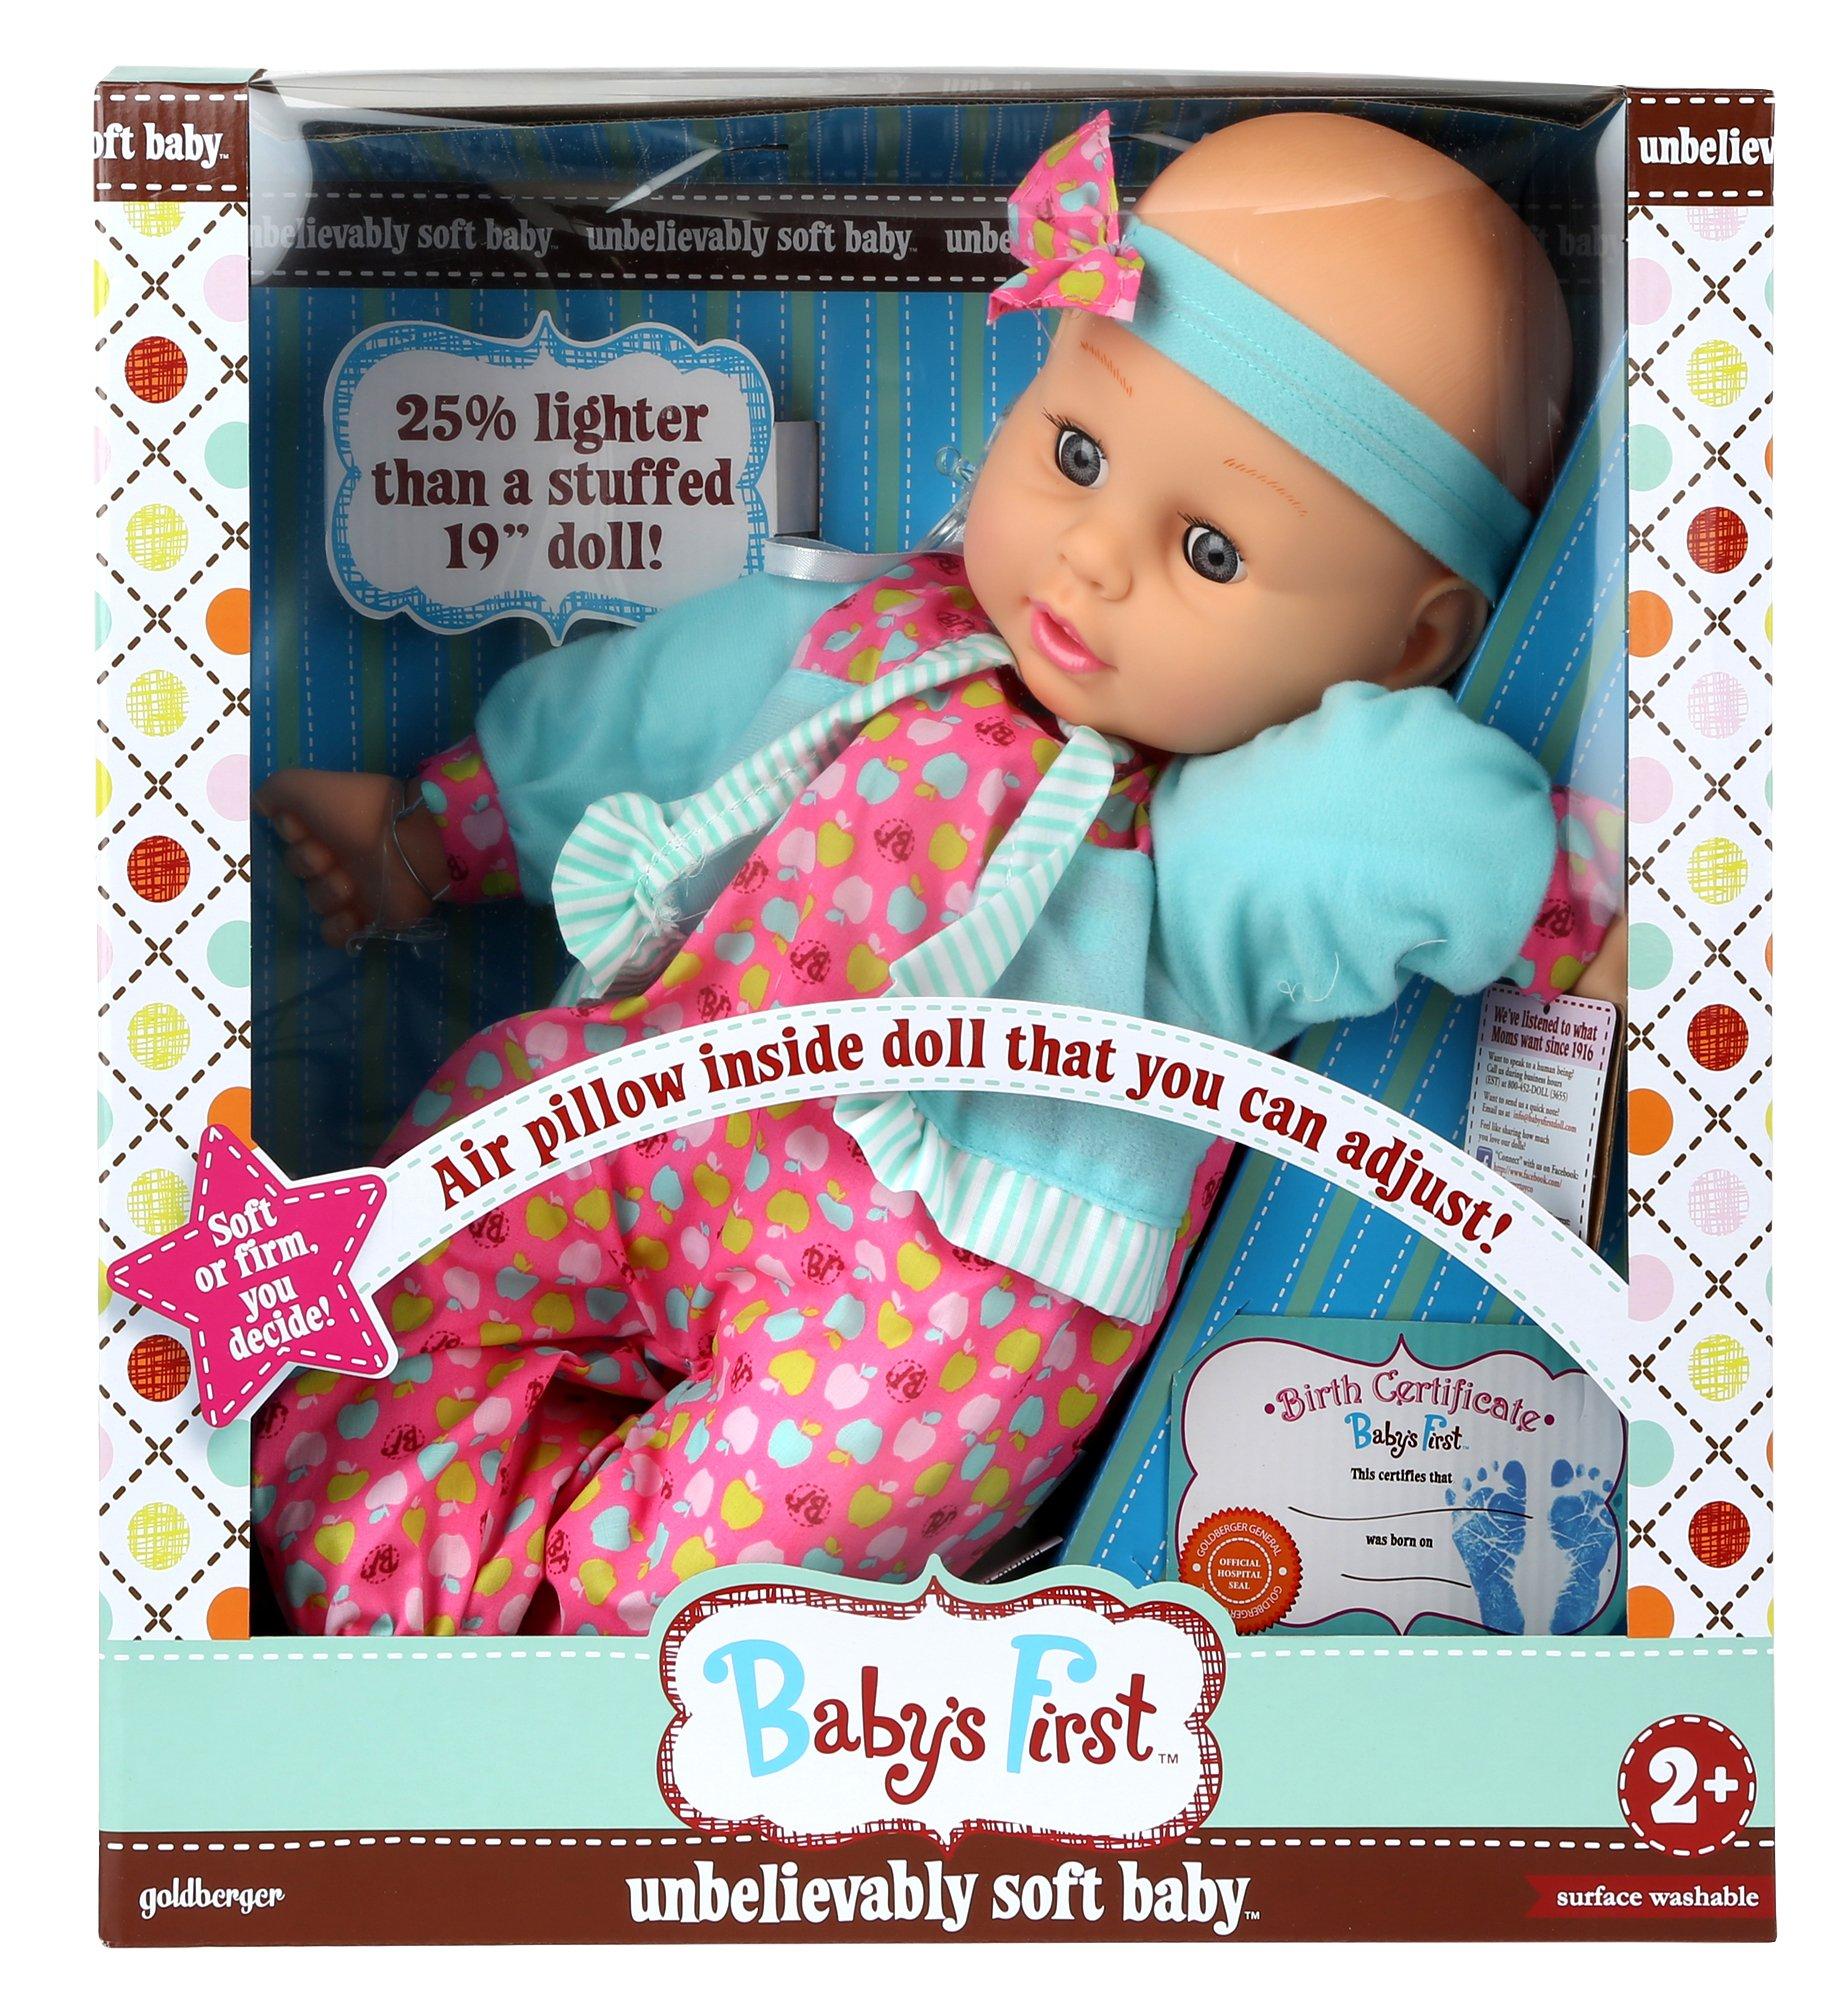 goldberger baby's first unbelievably soft doll